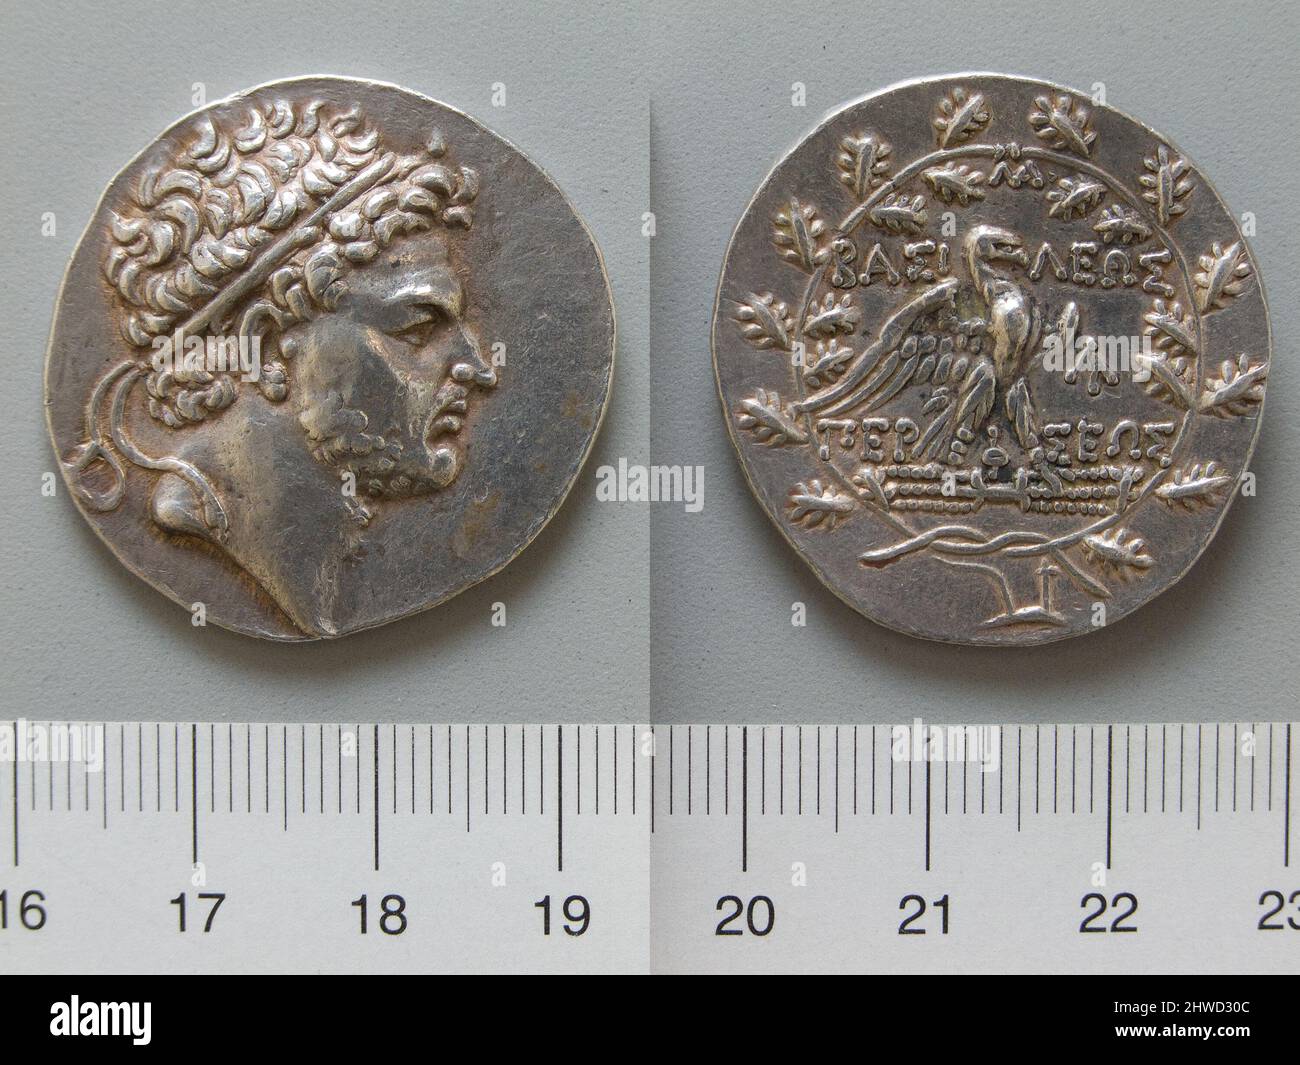 Coin of Perseus, King of Macedonia from Macedonia. Ruler: Perseus, King of Macedonia, ca. 212–166 B.C., ruled 178–168 B.C. Mint: Macedonia Artist: Unknown Stock Photo